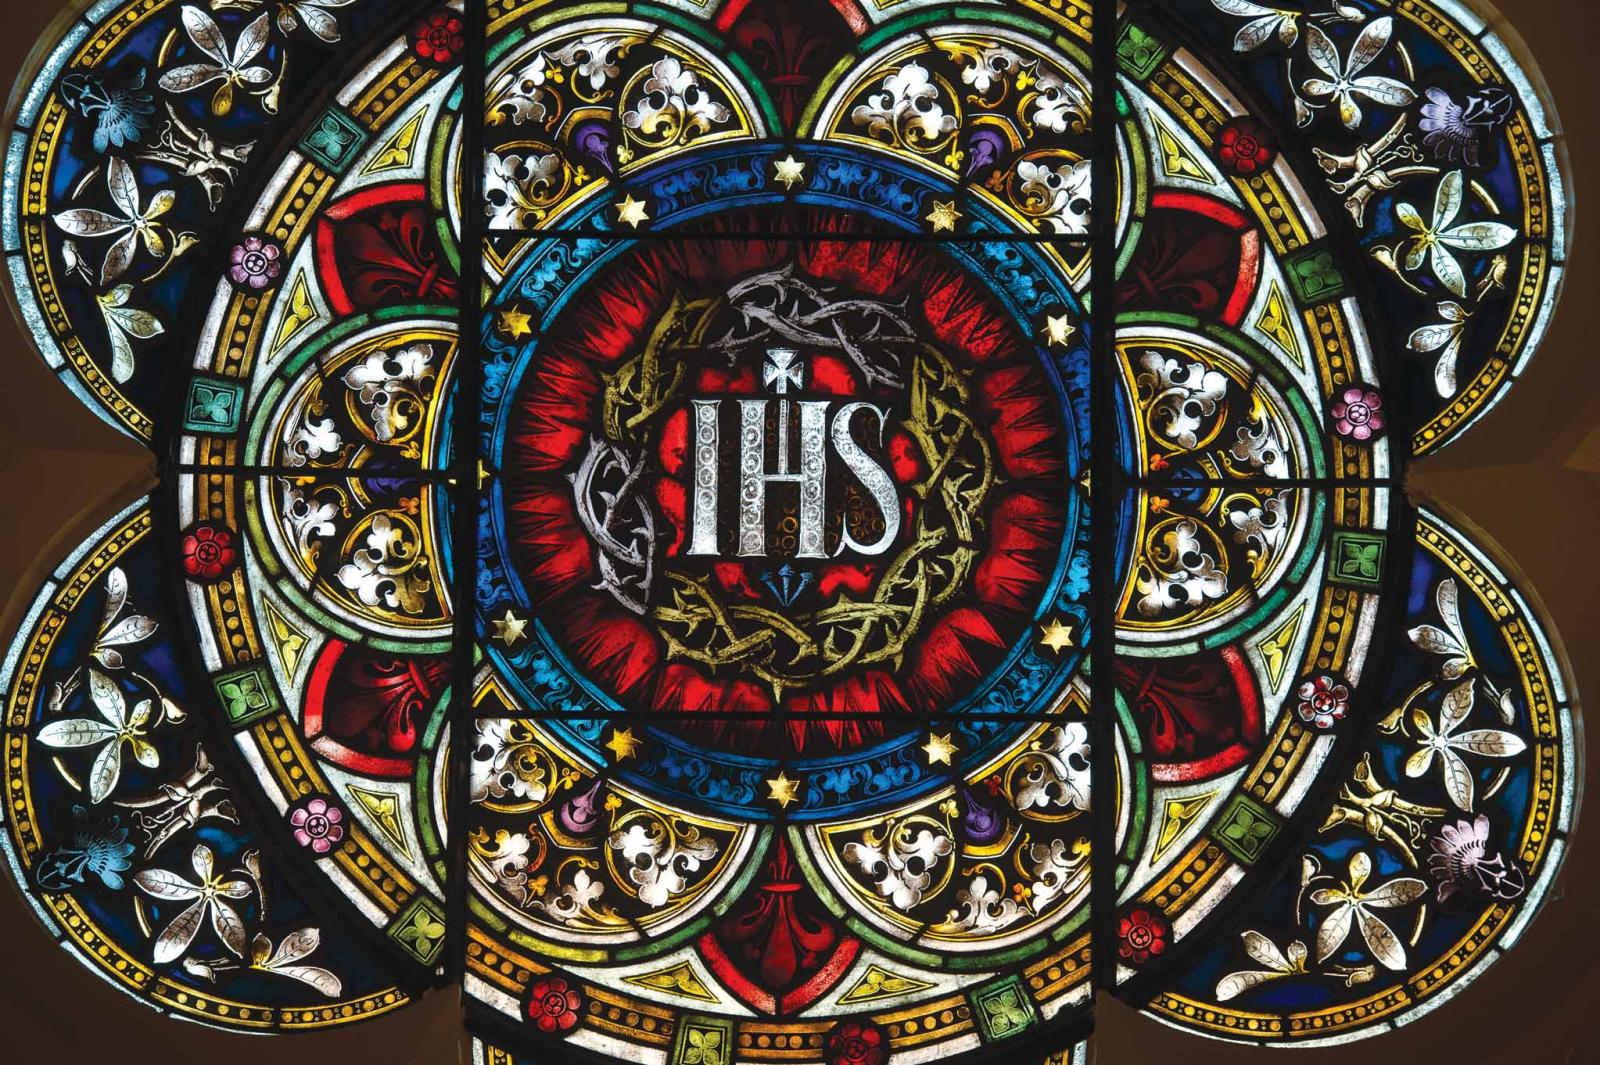 The IHS monogram used by the Jesuits is an abbreviation for the name of Jesus in Greek.